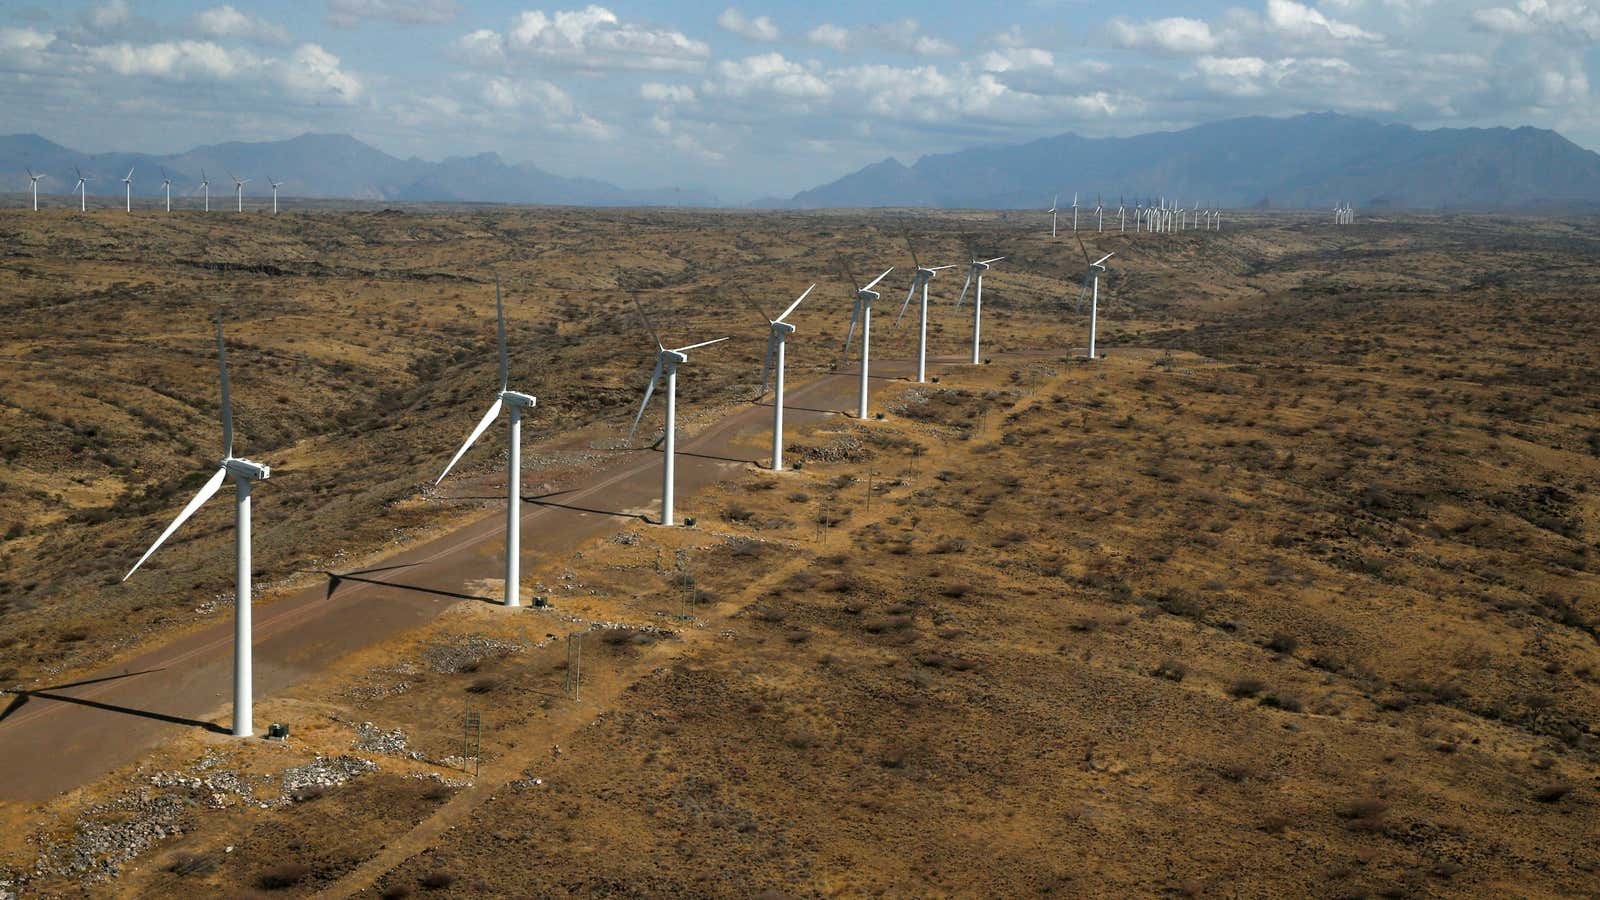 Africa’s largest wind power project.